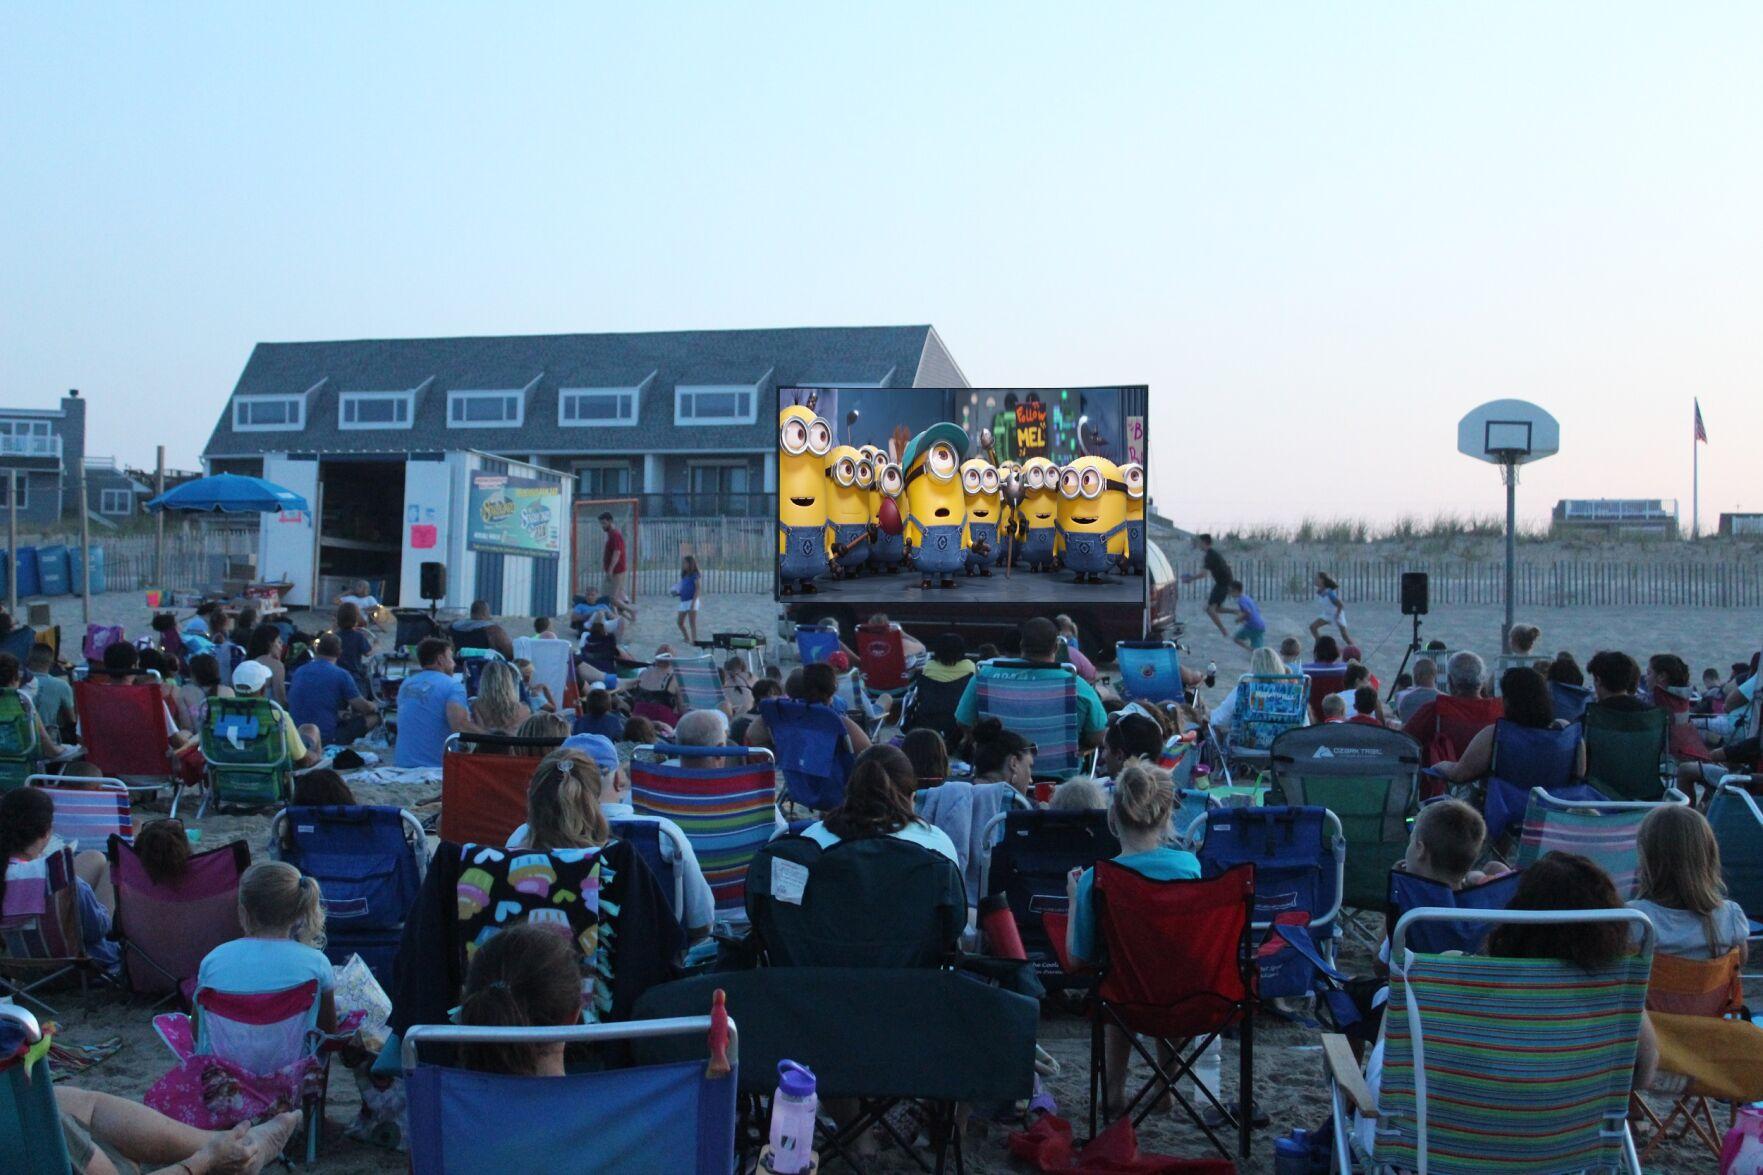 Movies and bonfires planned in Dewey Beach Arts & Entertainment